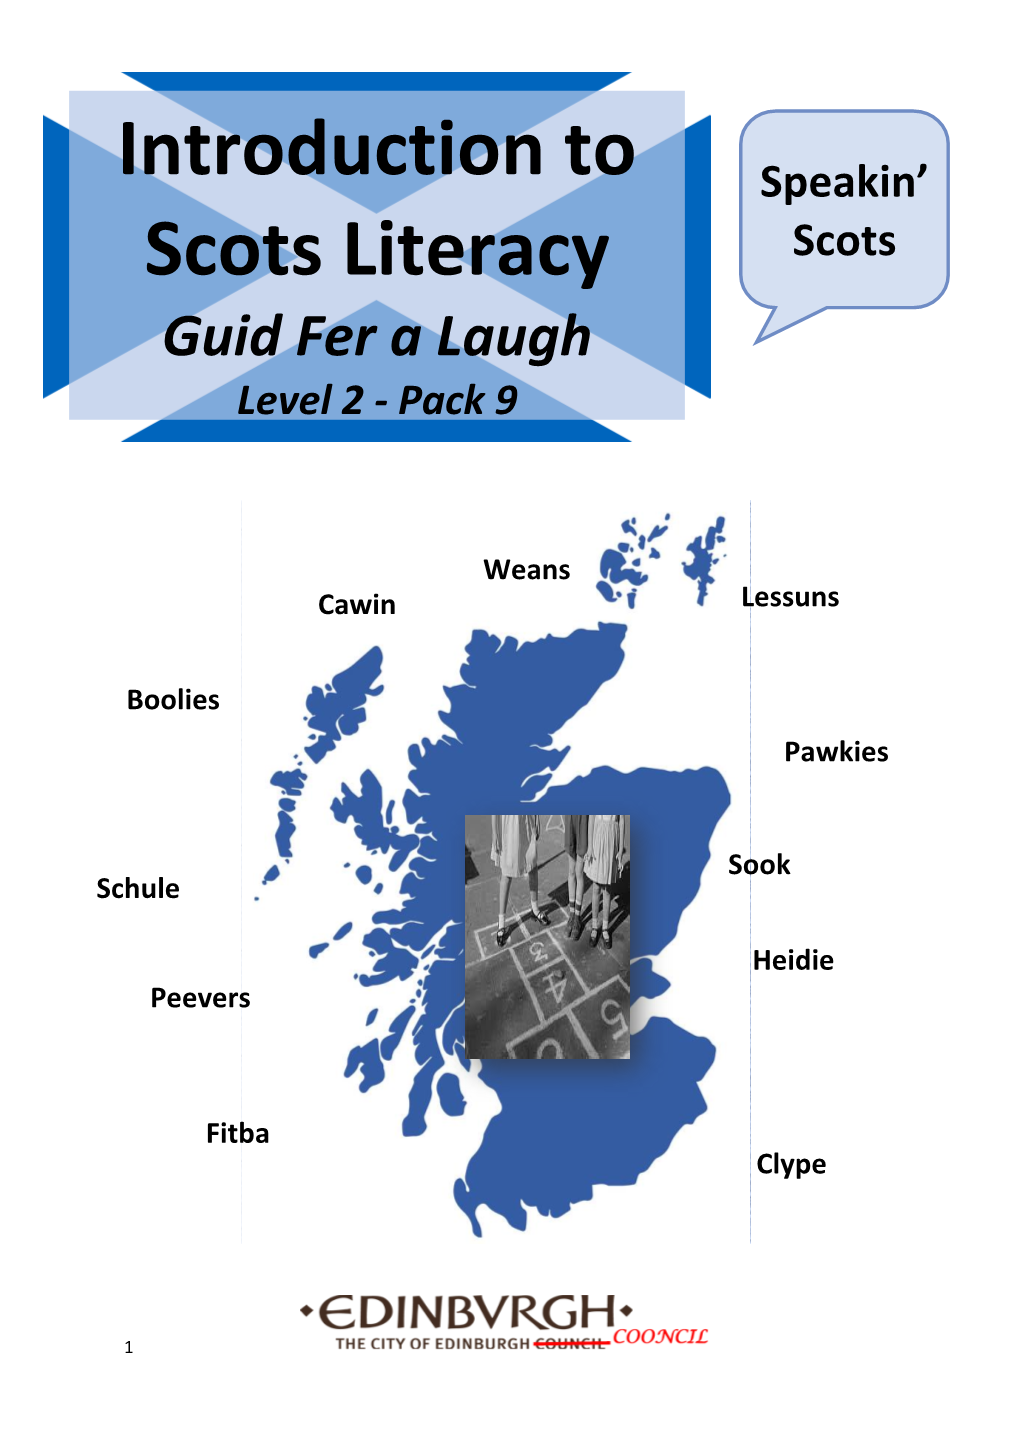 Introduction to Scots Literacy